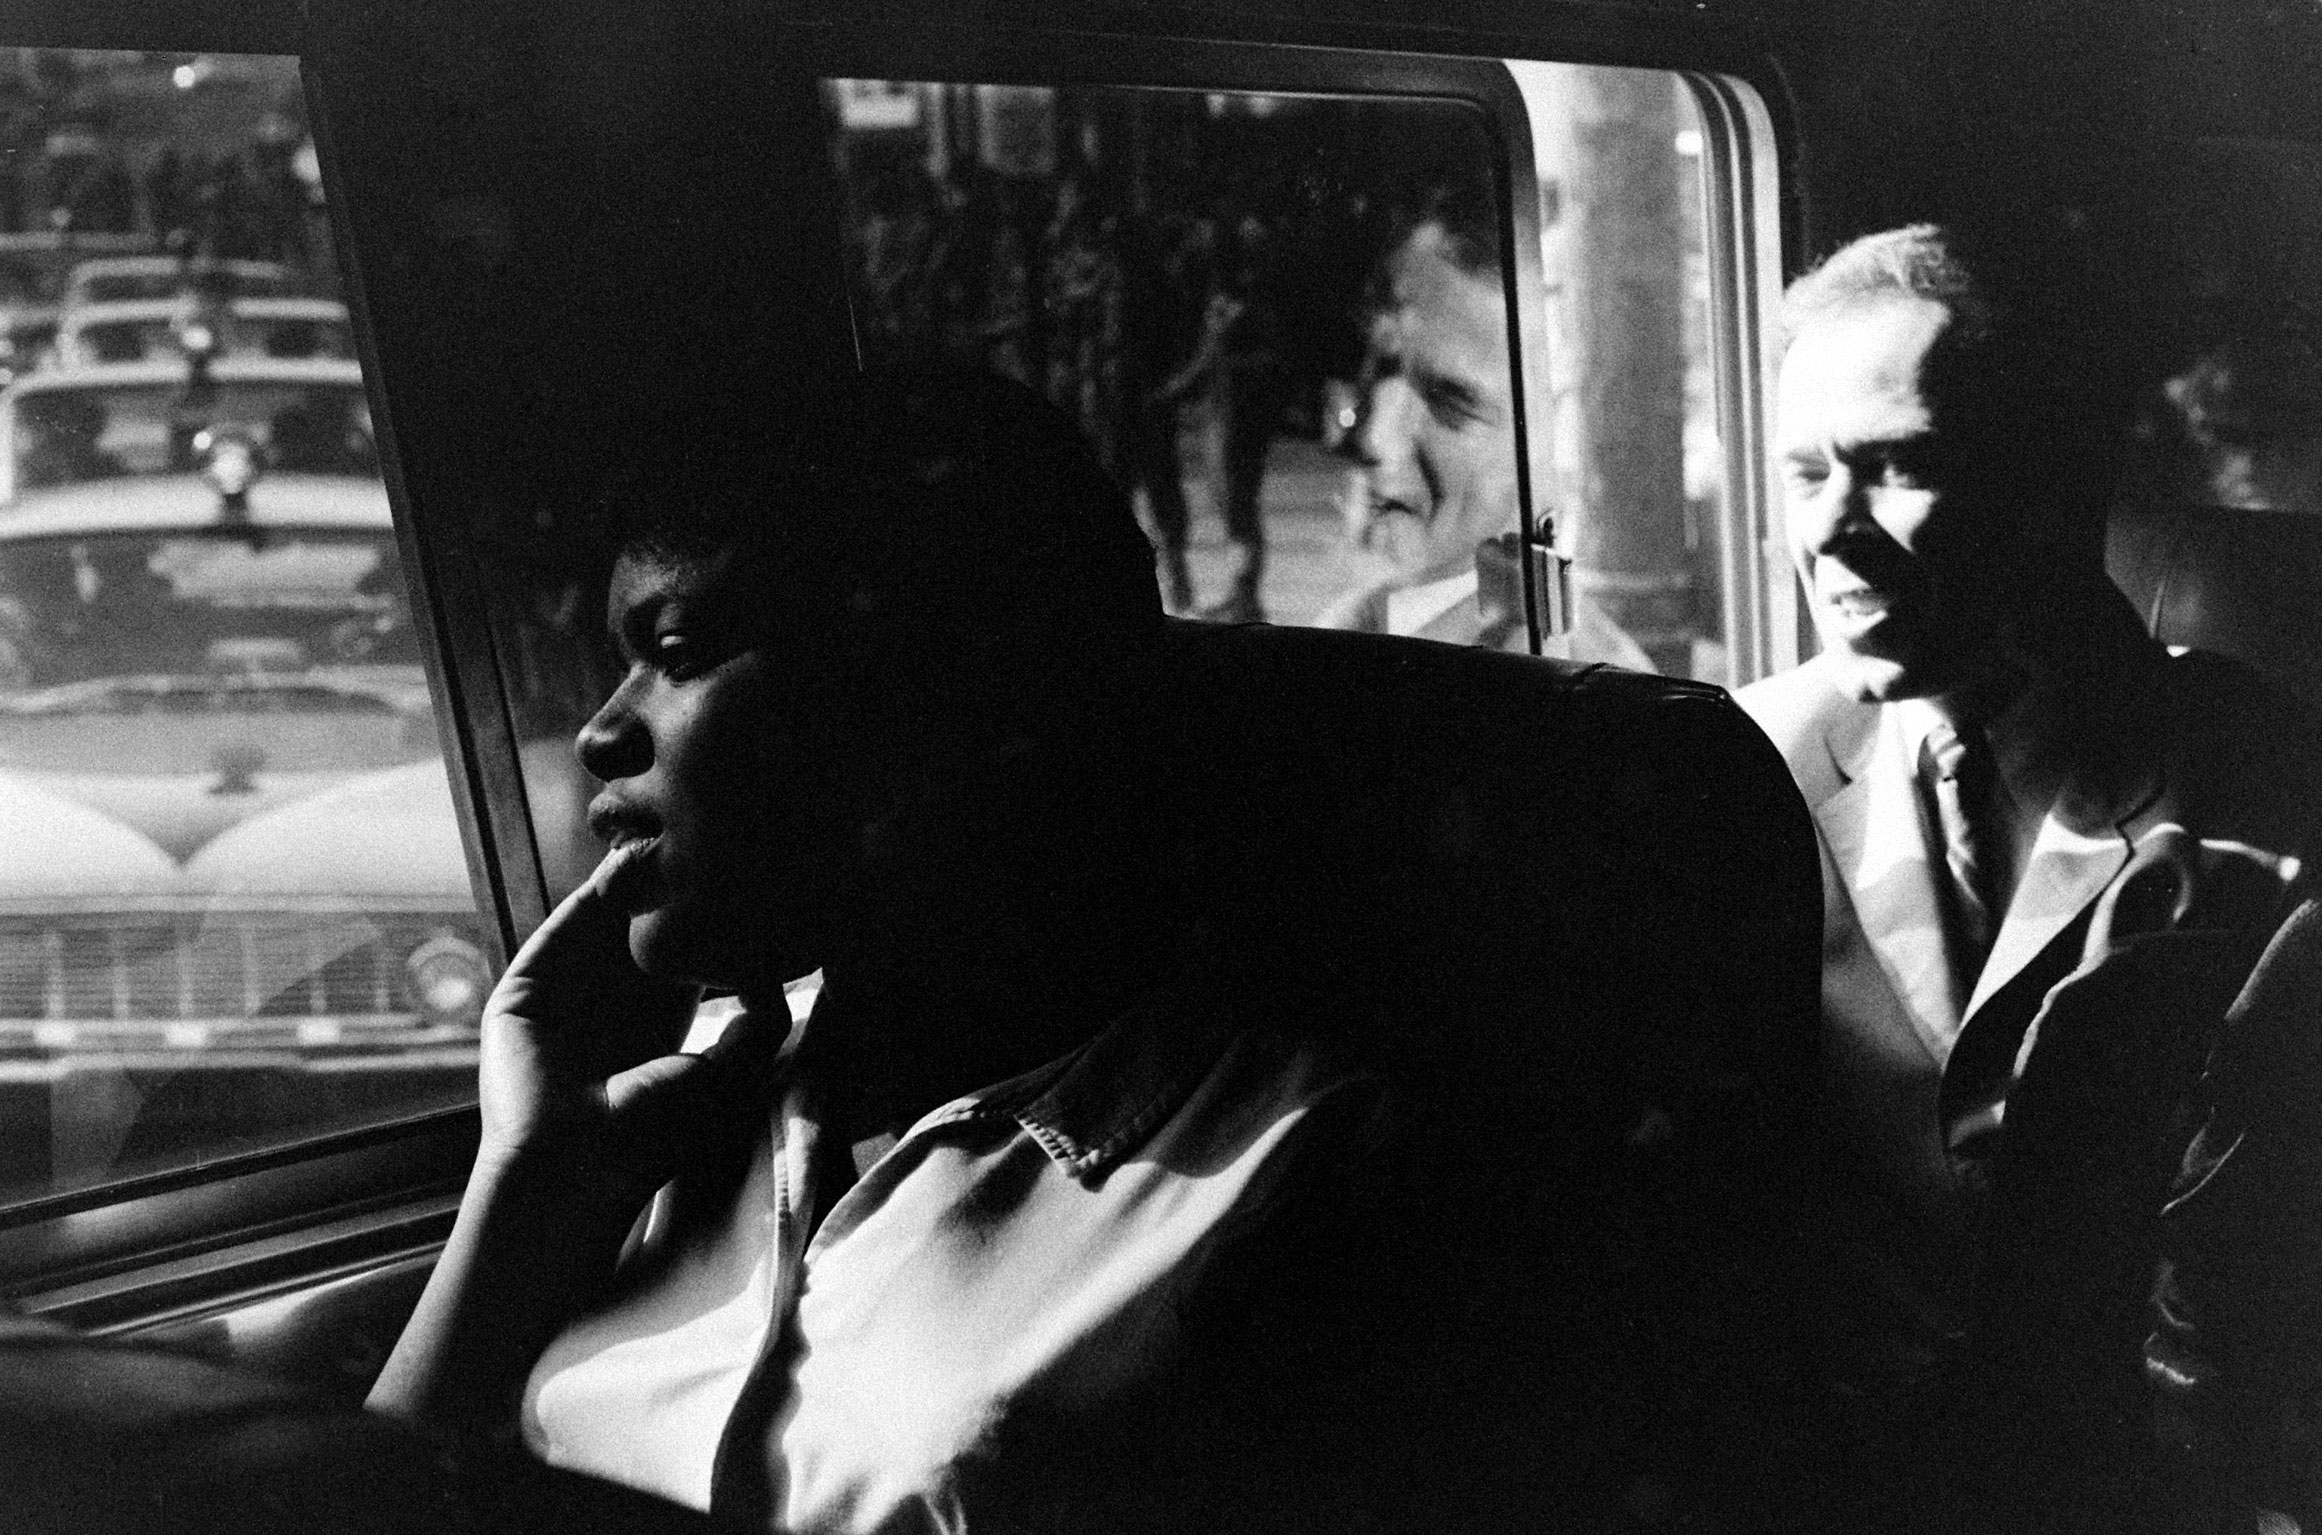 Freedom riders on a bus in the Deep South.